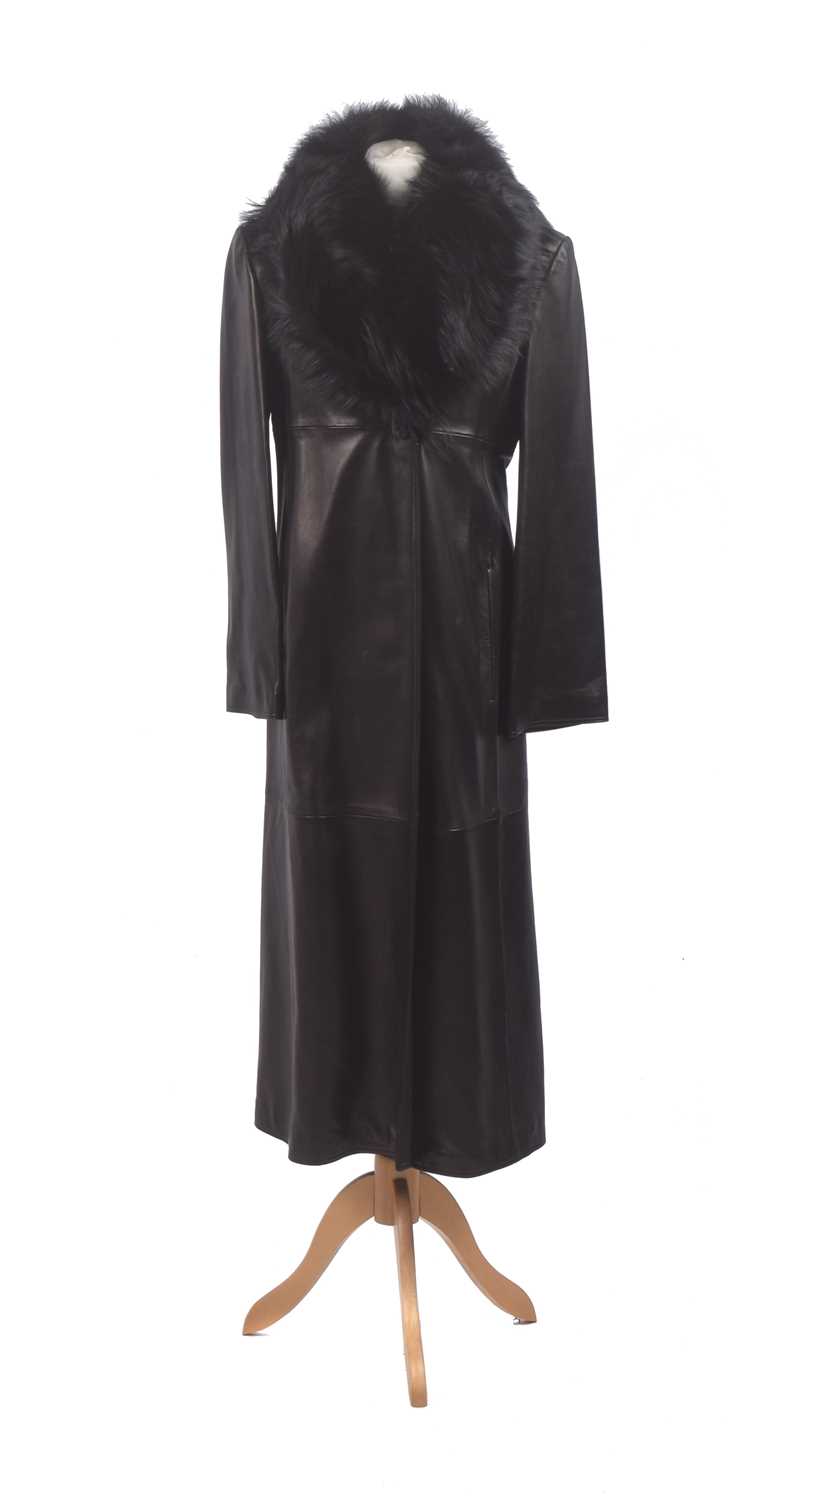 Lot 141 - A leather coat by Gianni Versace